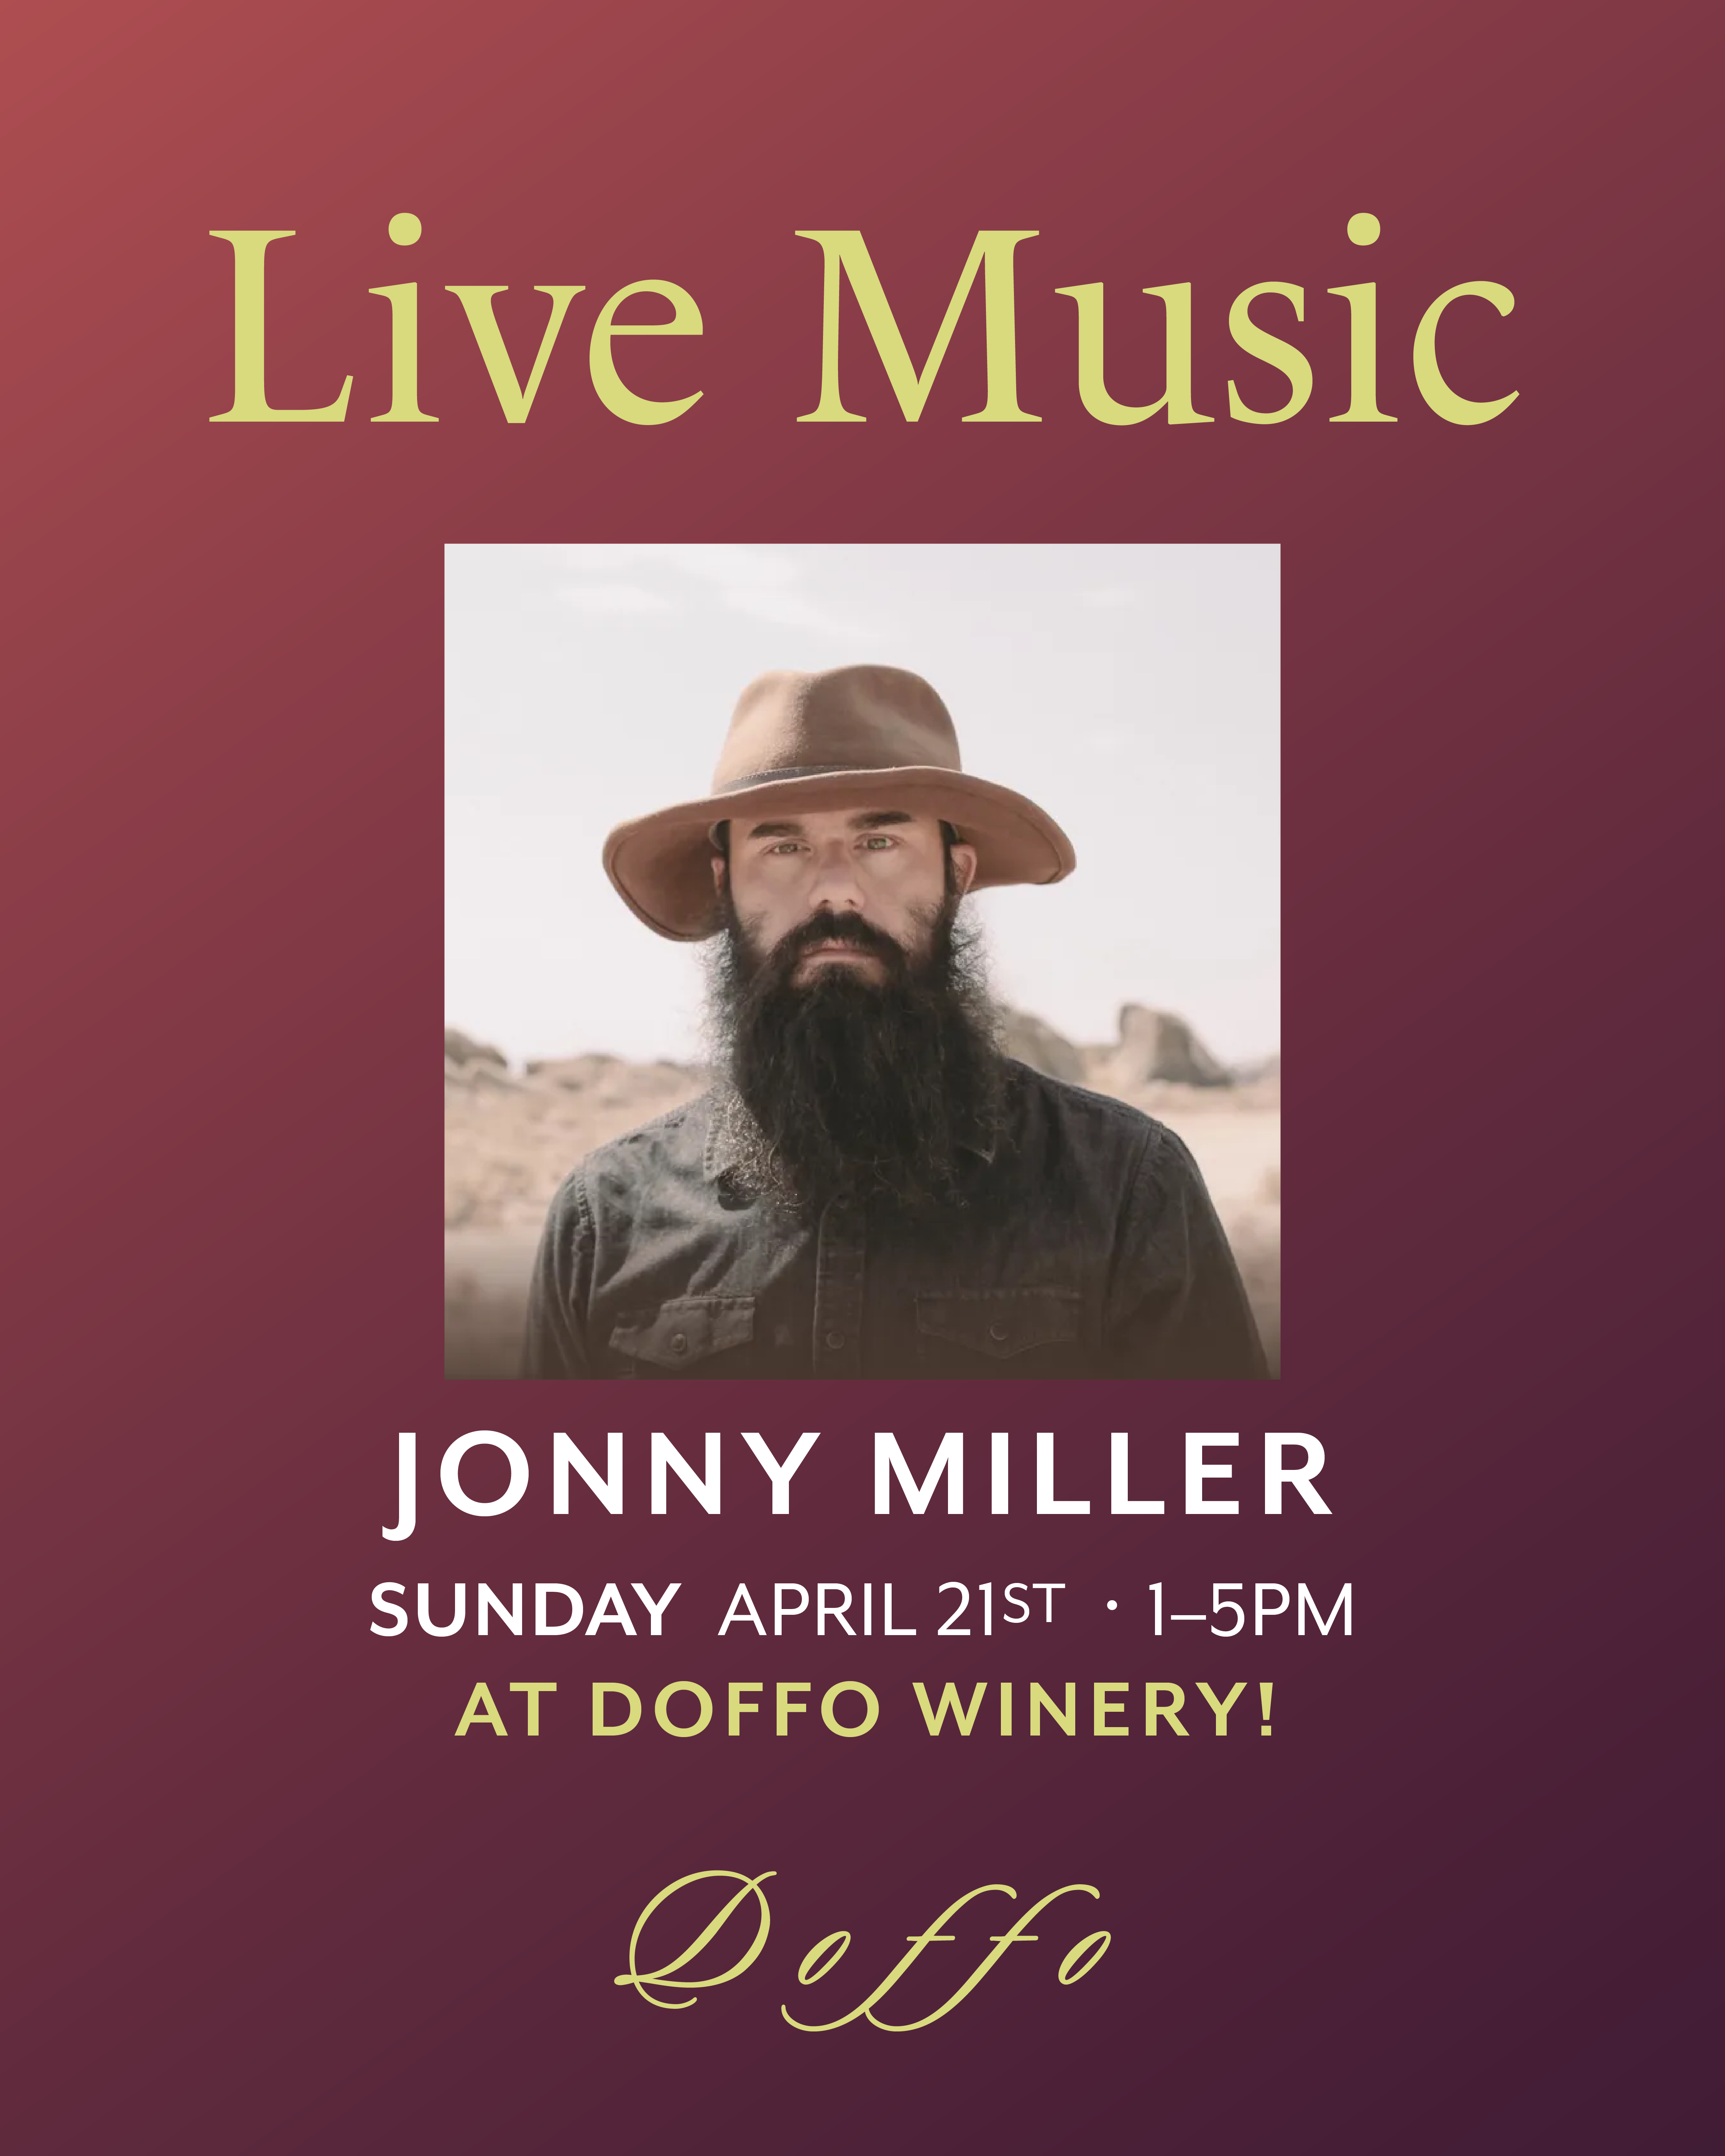 Live Music at the Doffo Winery | Jonny Miller